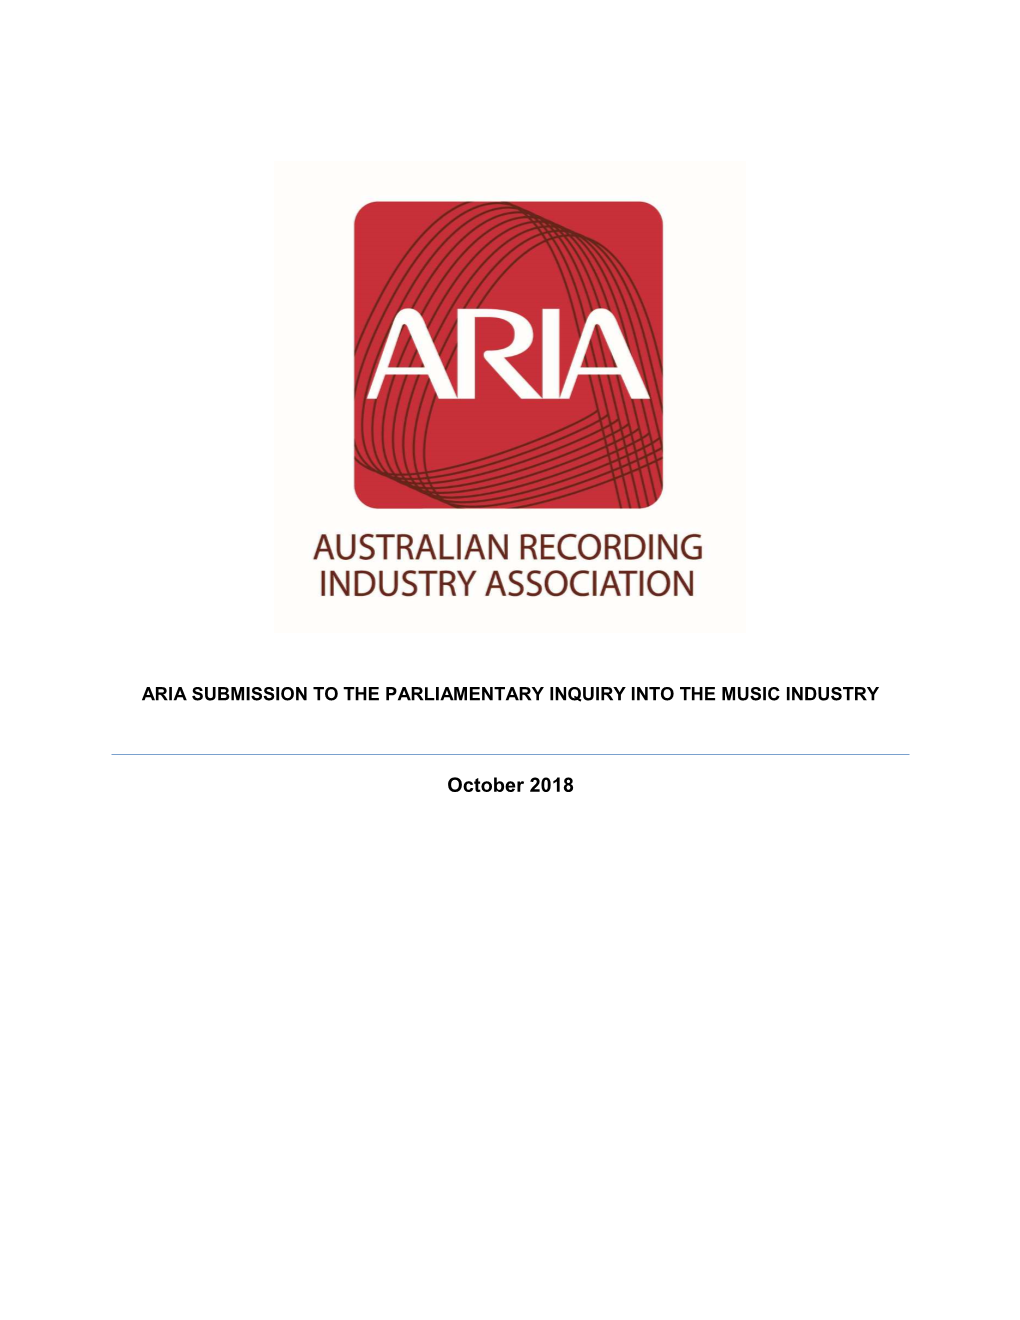 Aria Submission to the Parliamentary Inquiry Into the Music Industry